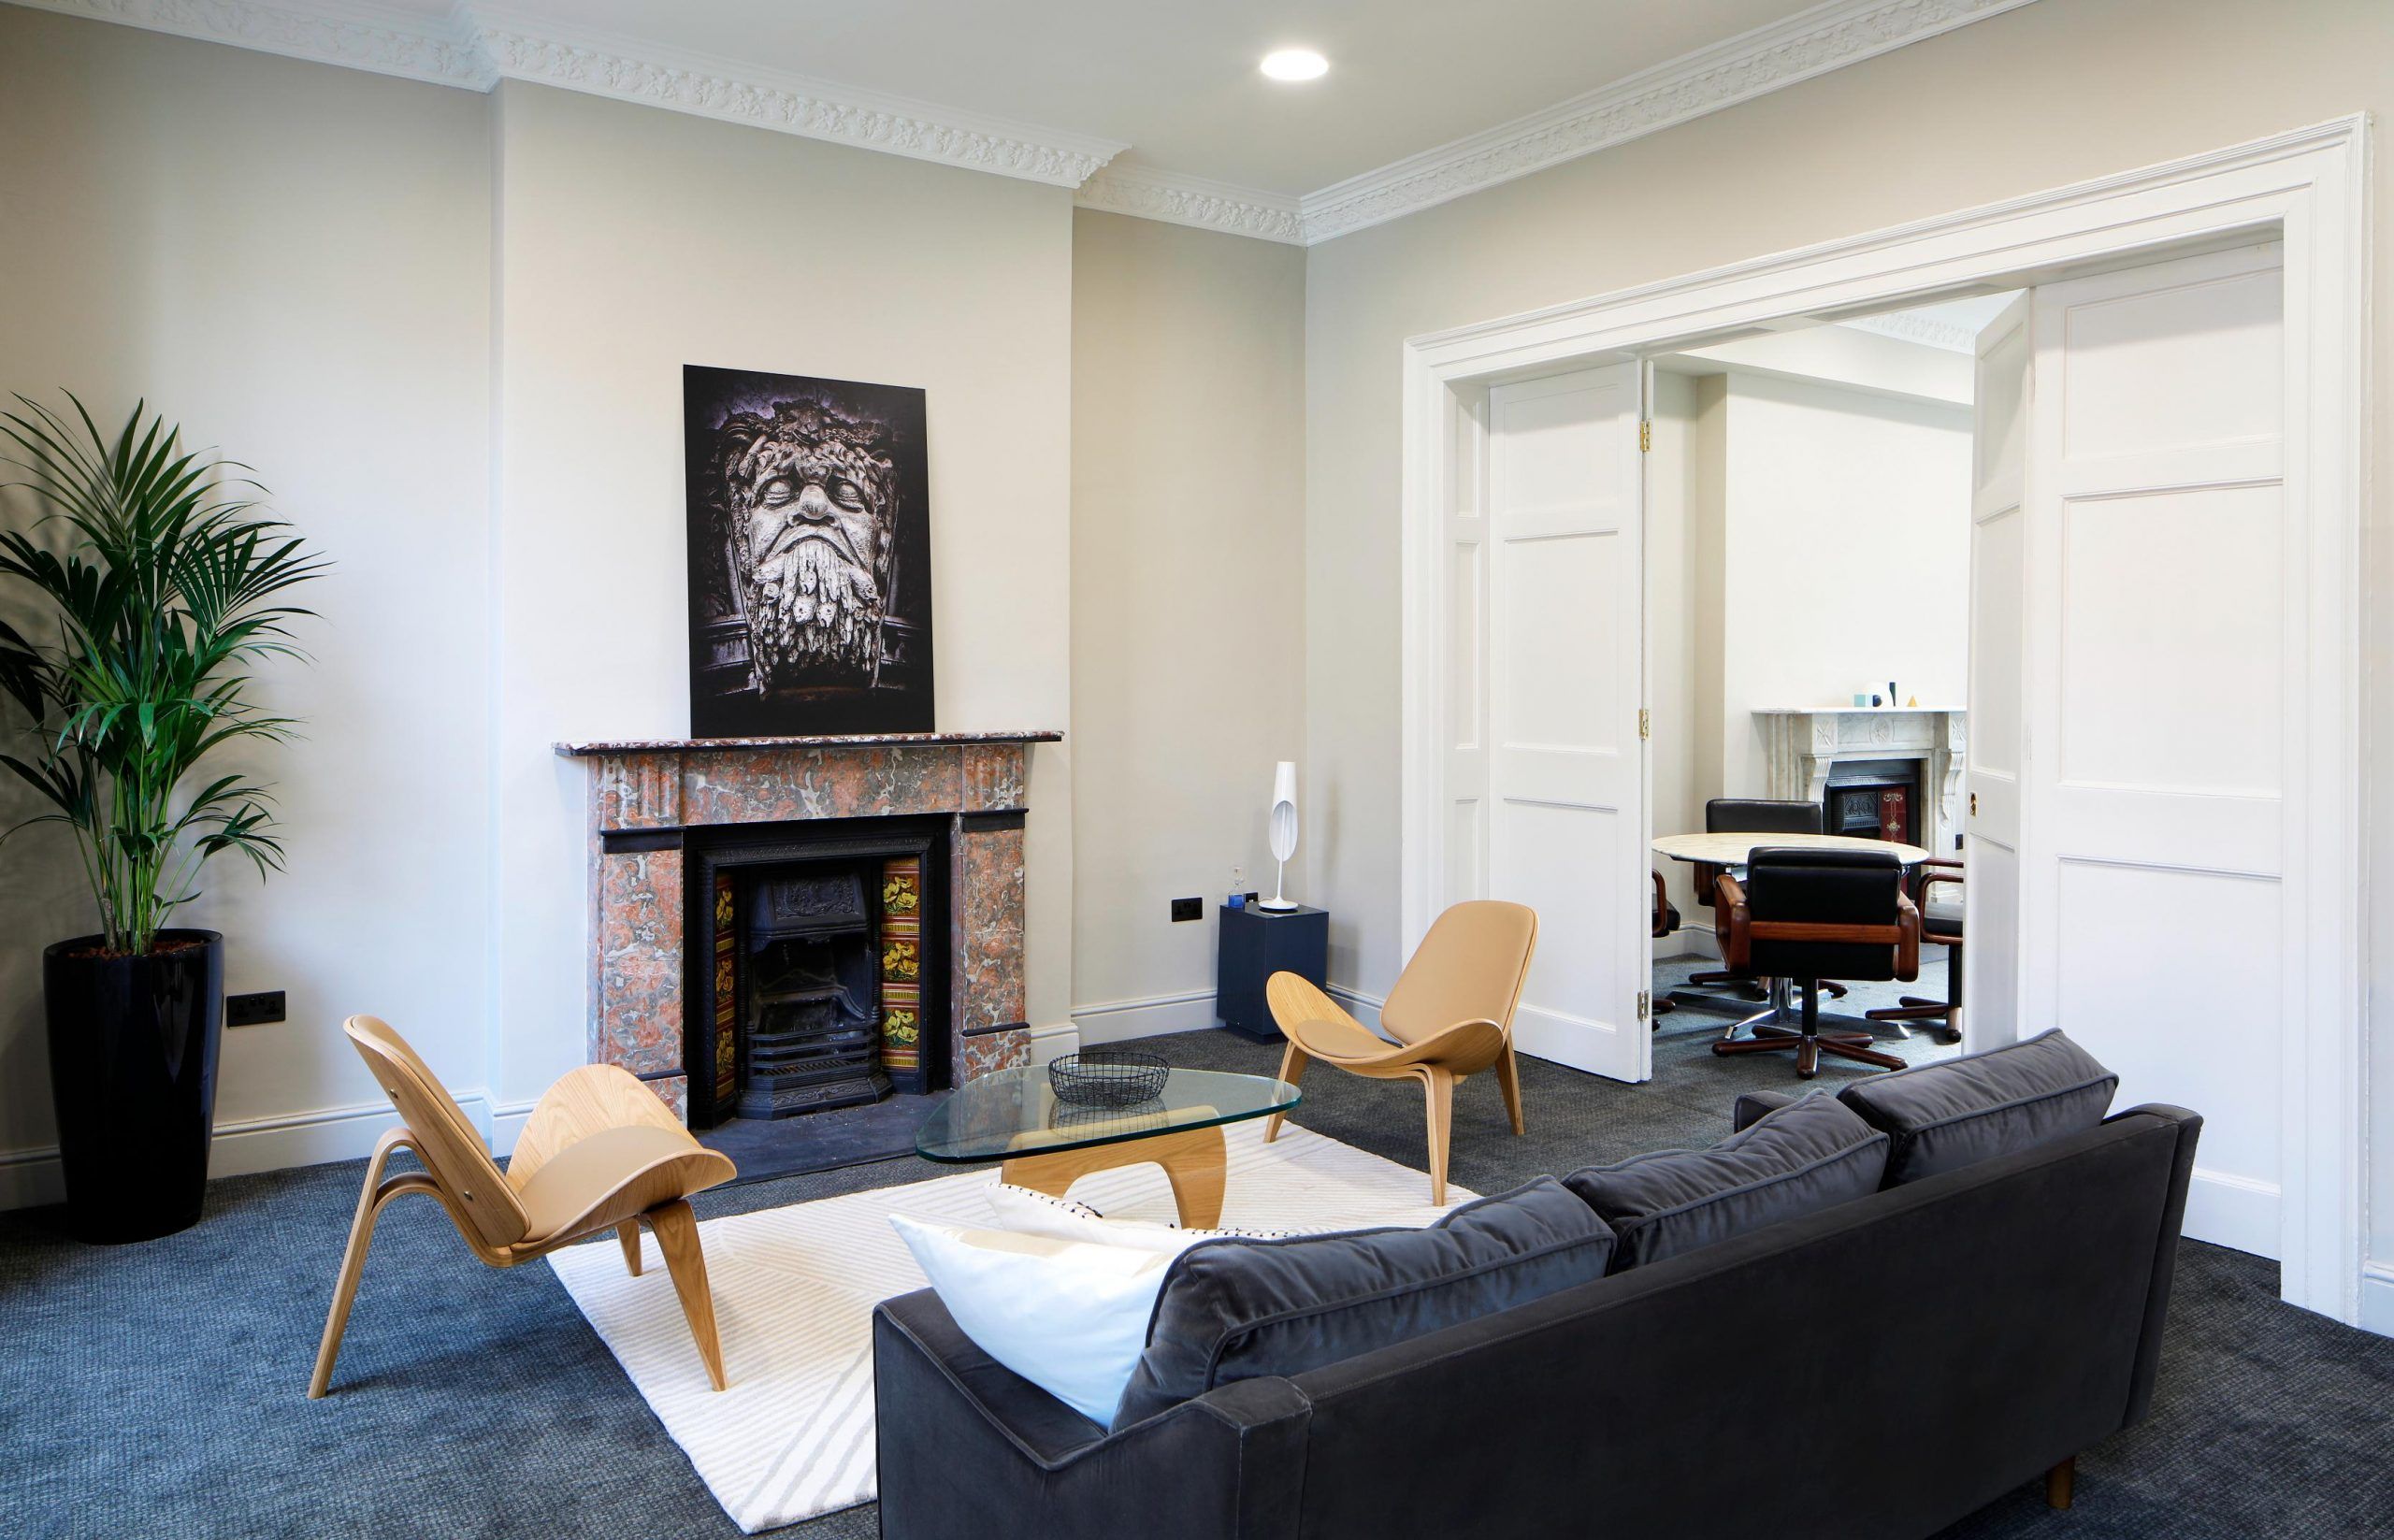 128 Lower Baggot Street, Dublin 2 - flexible office space - breakout area with couch and fireplace